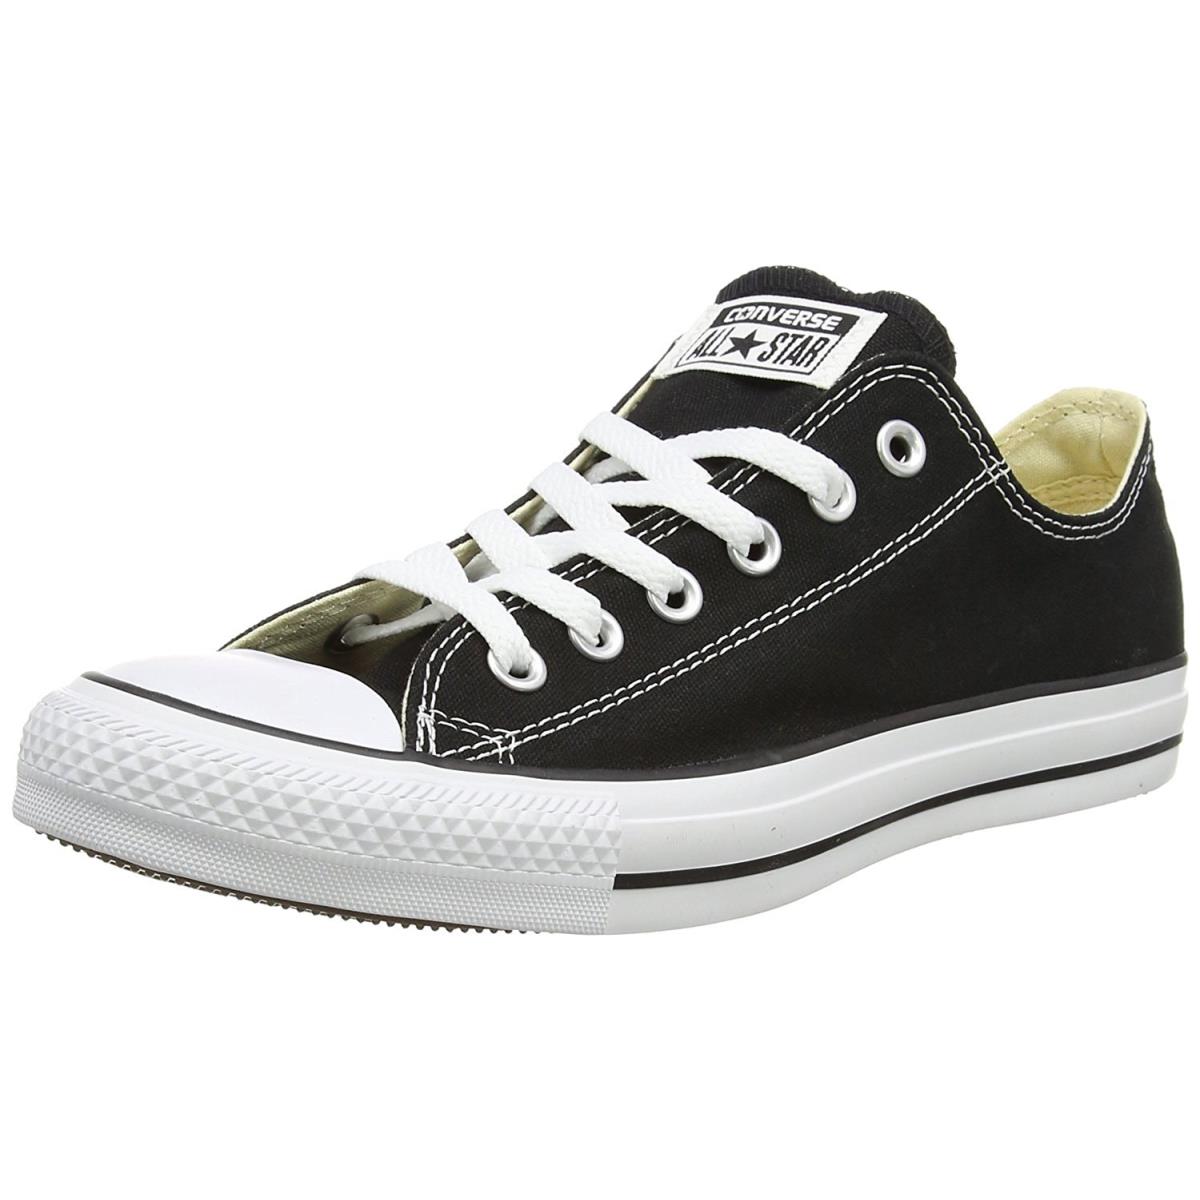 Converse Unisex Chuck Taylor All Star Low Top Sneaker - Black Black/White